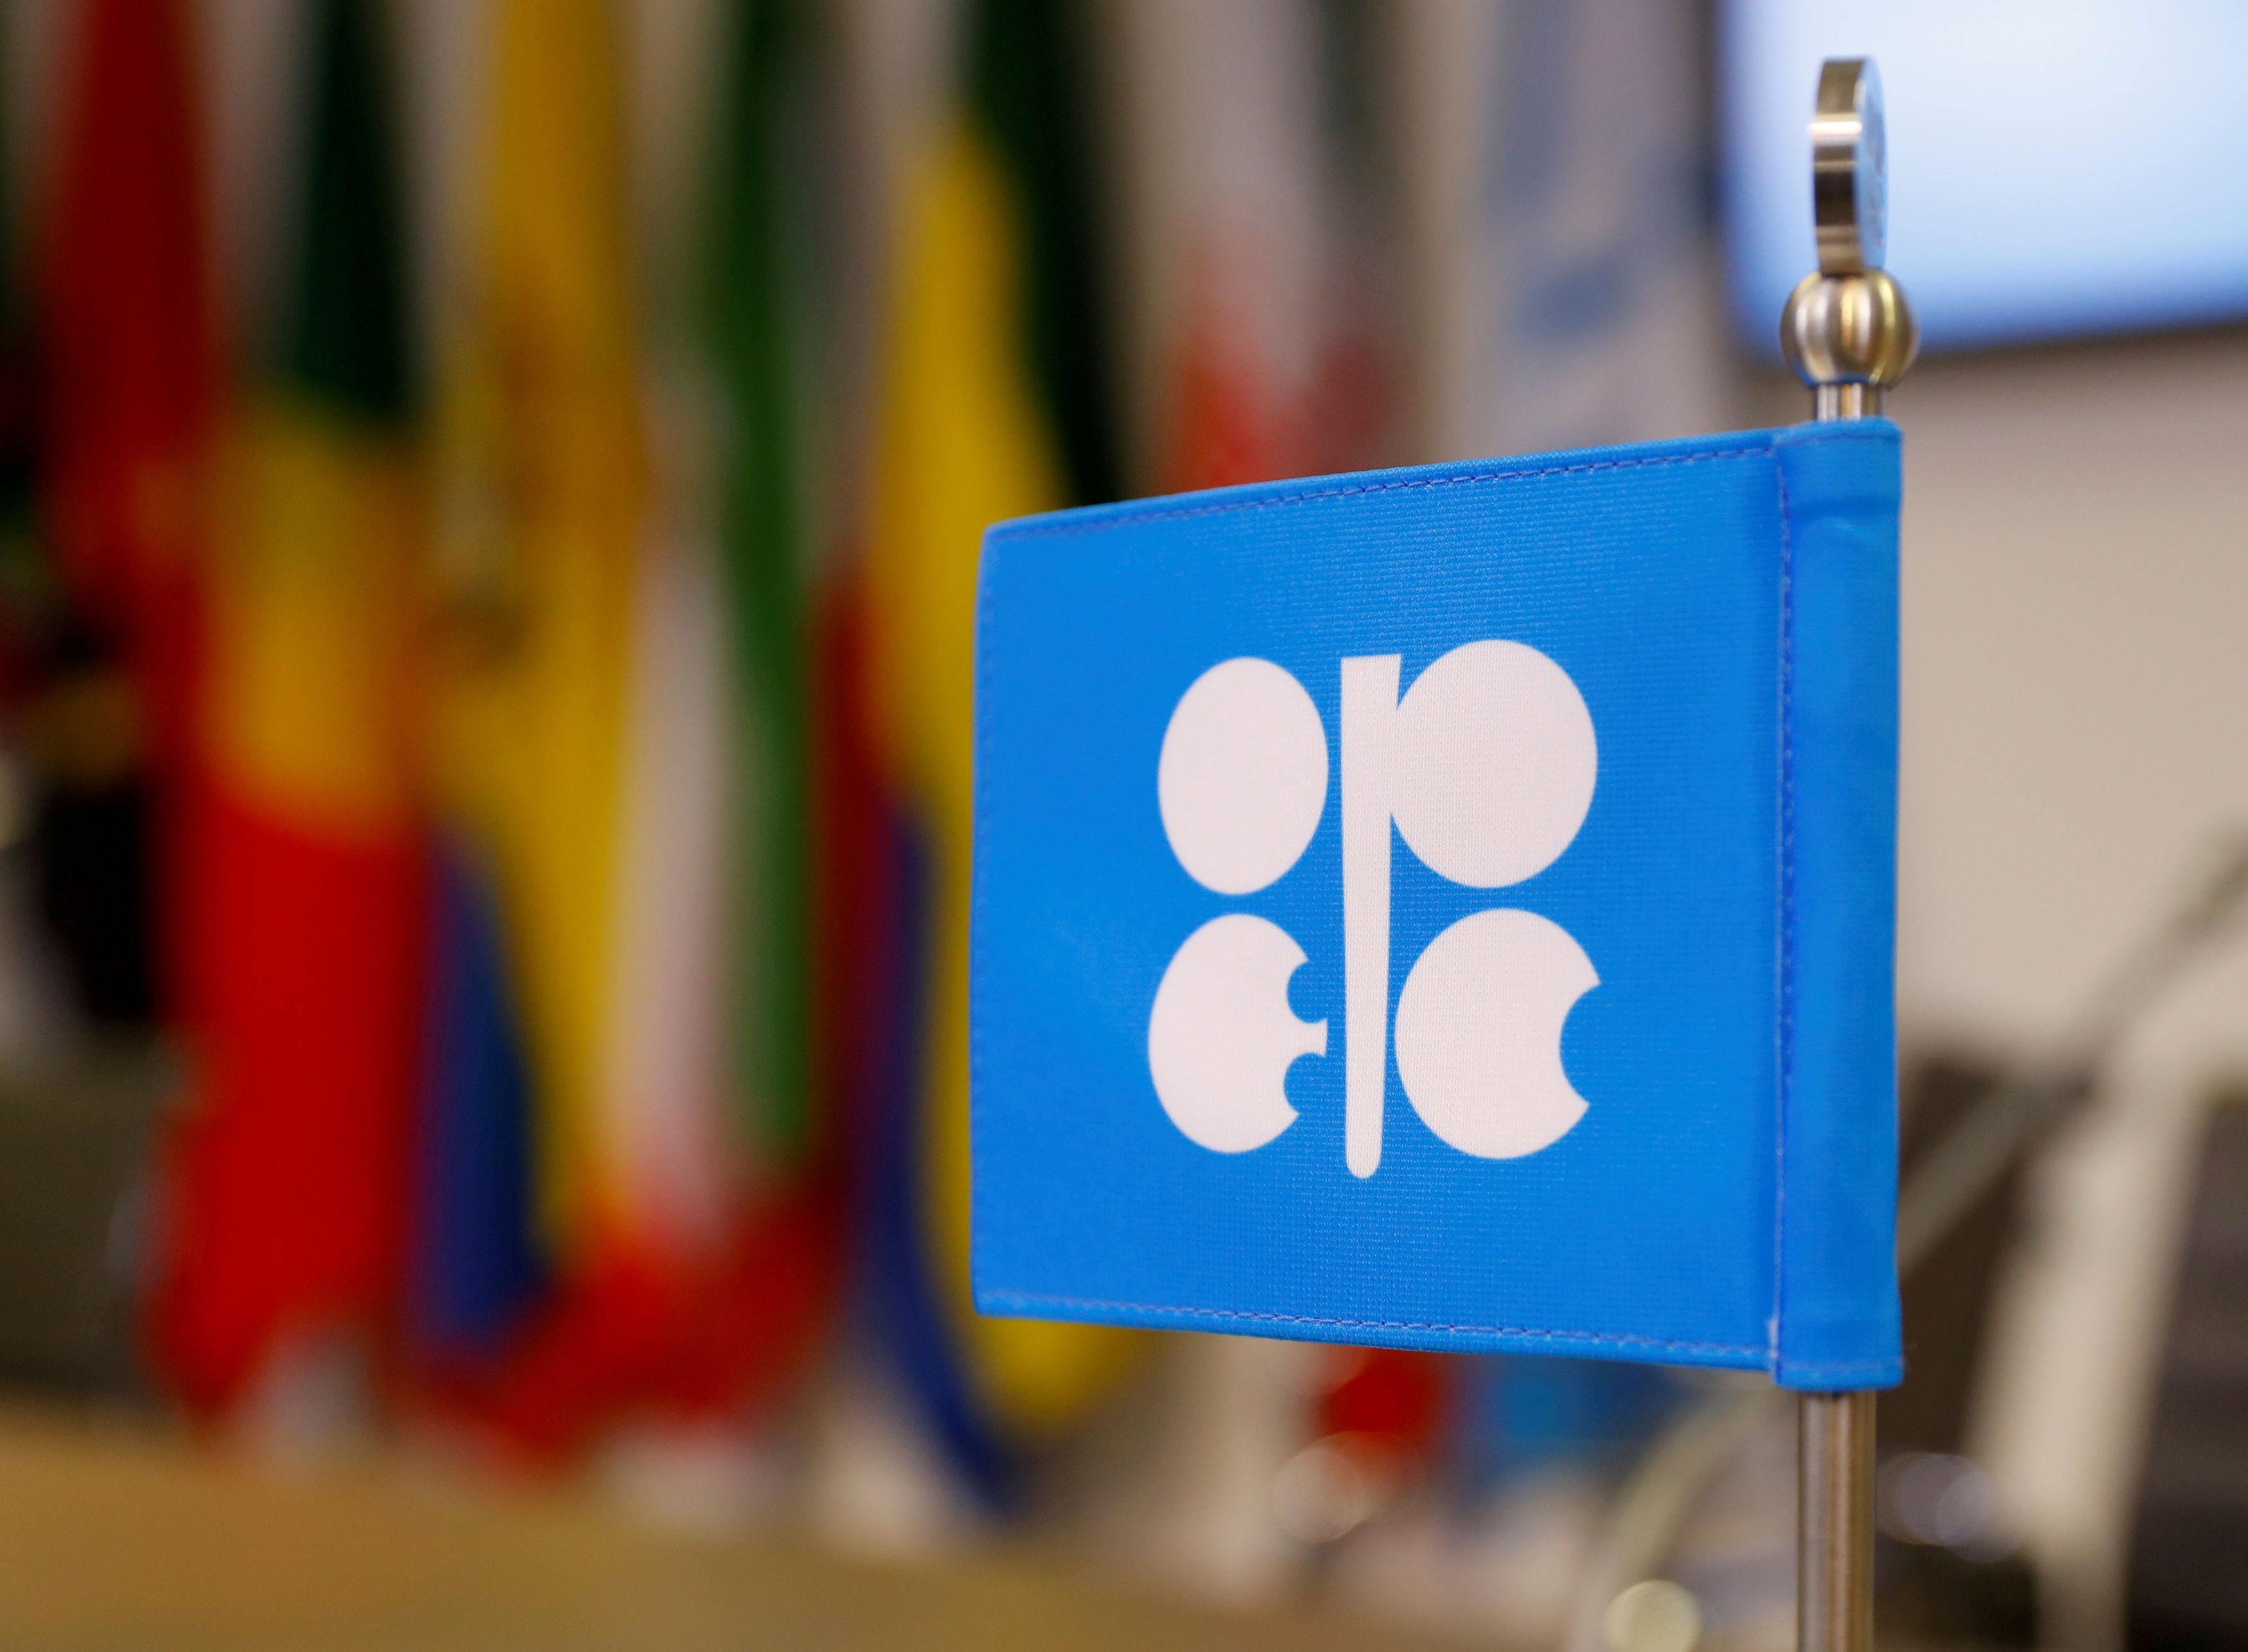 FILE PHOTO: The logo of the Organization of the Petroleum Exporting Countries (OPEC) is seen inside their headquarters in Vienna